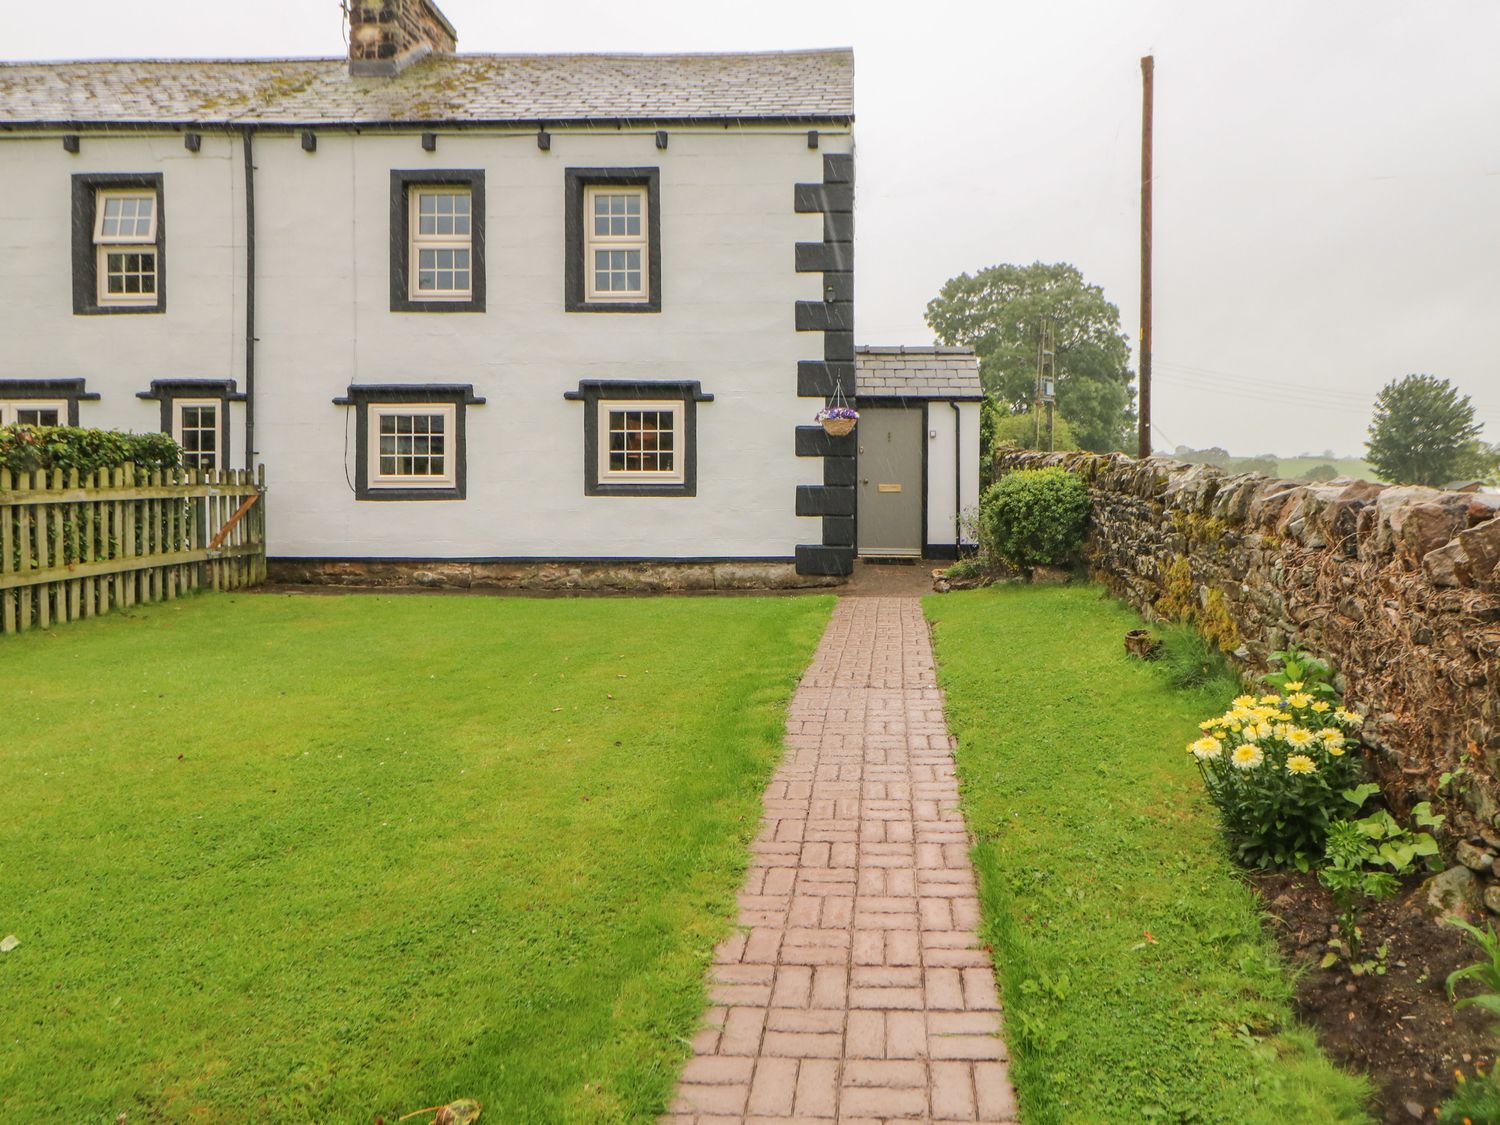 Orchard Cottage - Lake District - 1050736 - photo 1